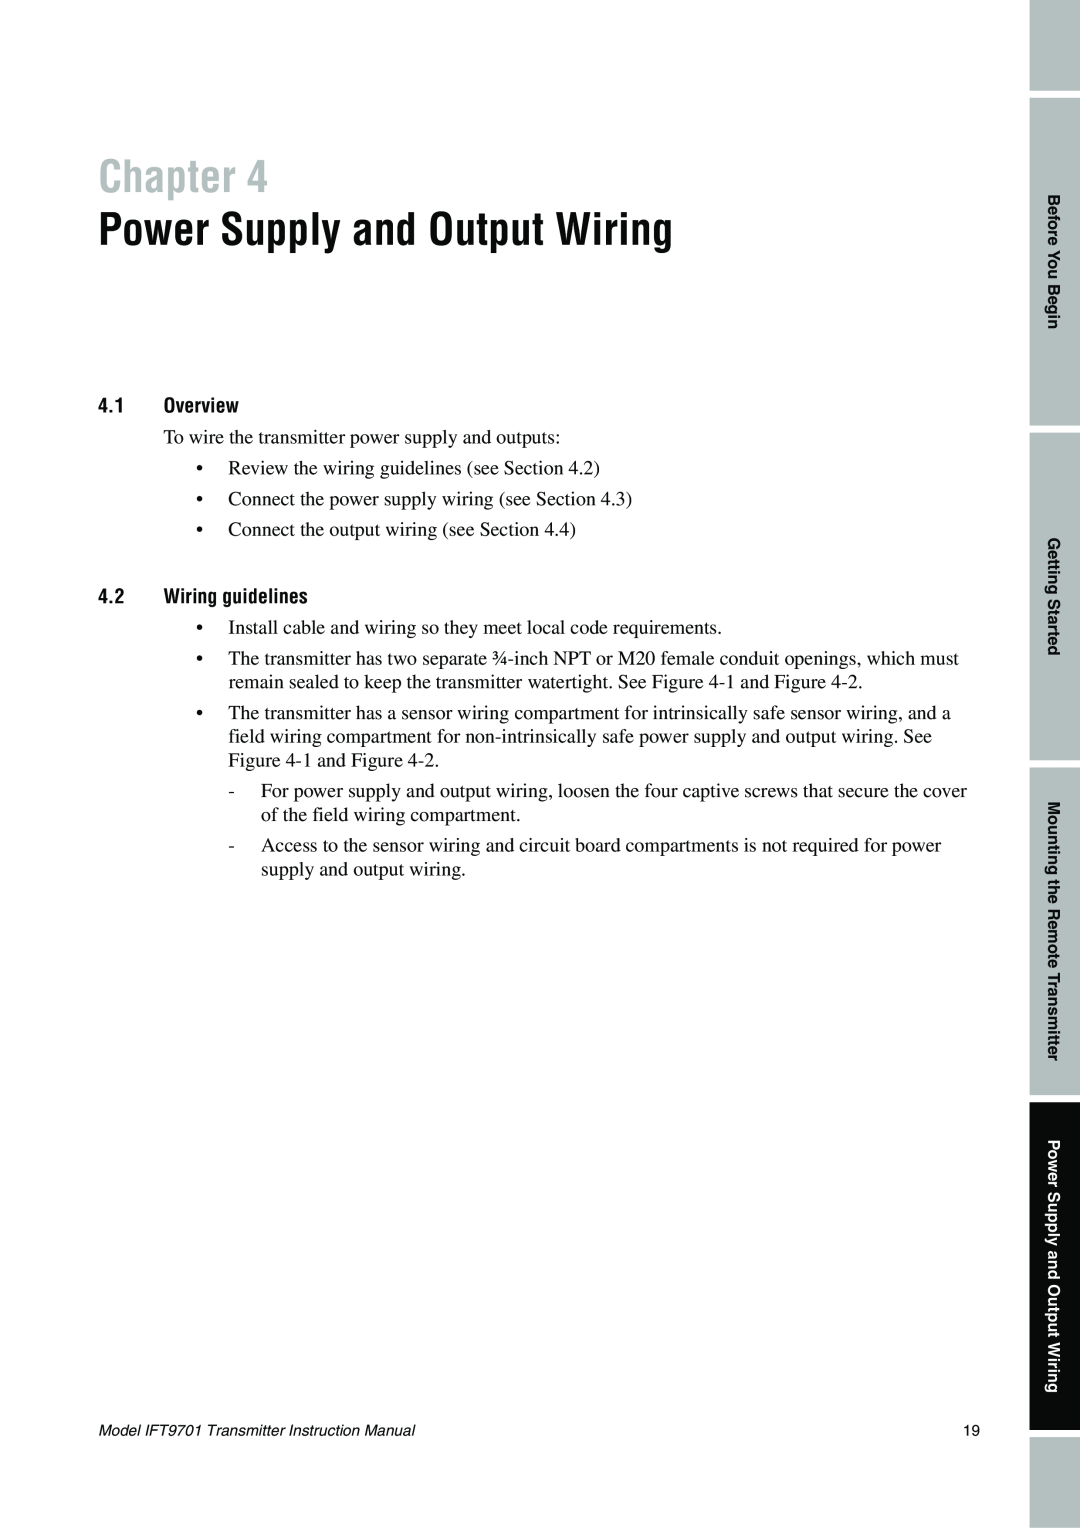 Emerson IFT9701 instruction manual Power Supply and Output Wiring, Chapter, 4.1Overview, 4.2Wiring guidelines 